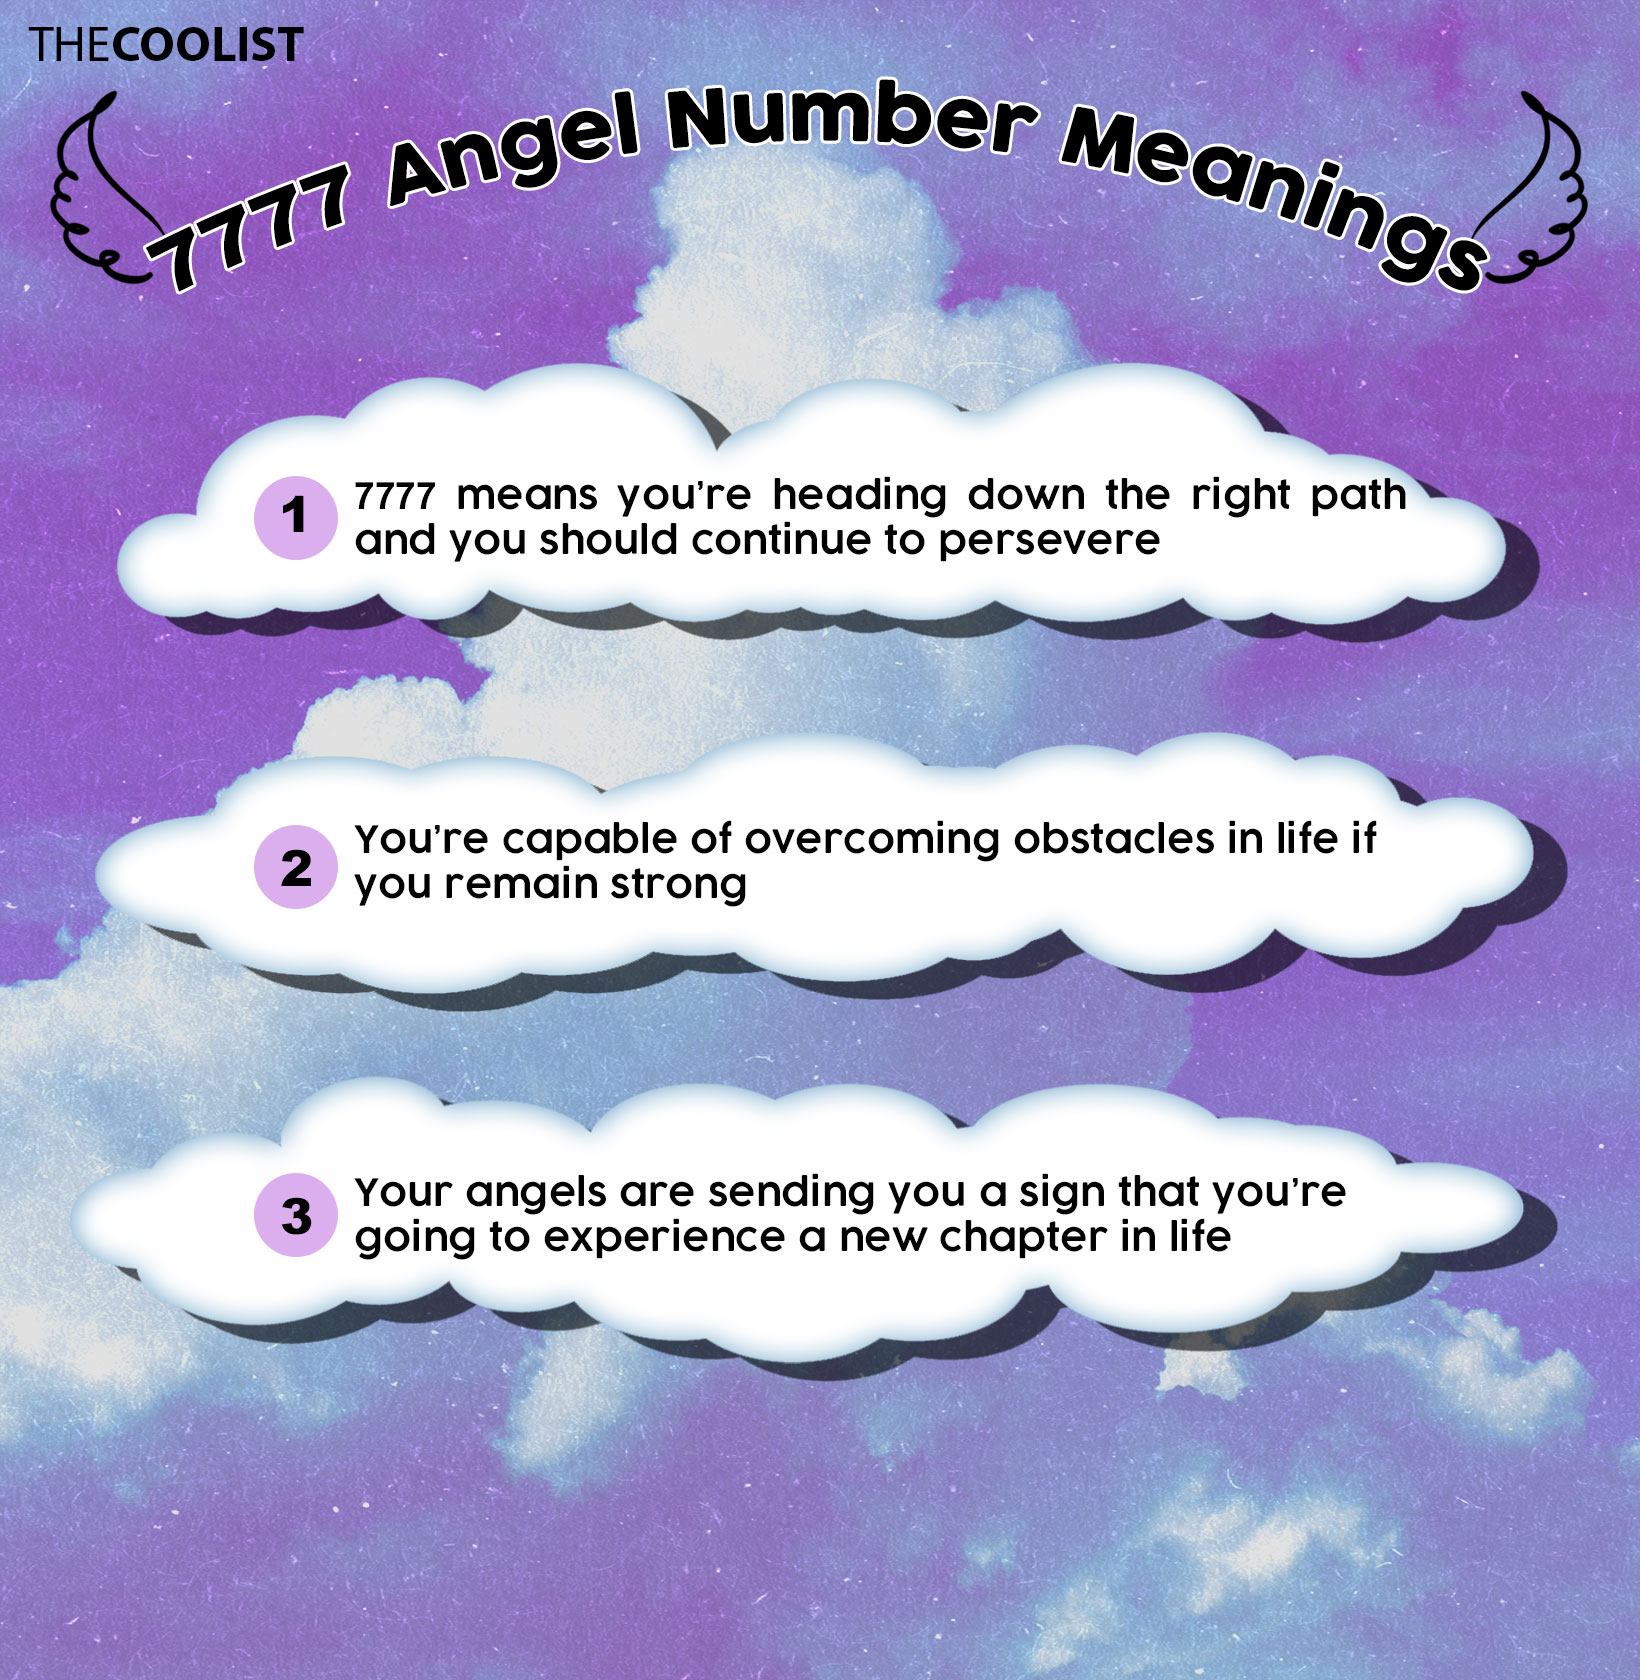 7777 angel number infographic